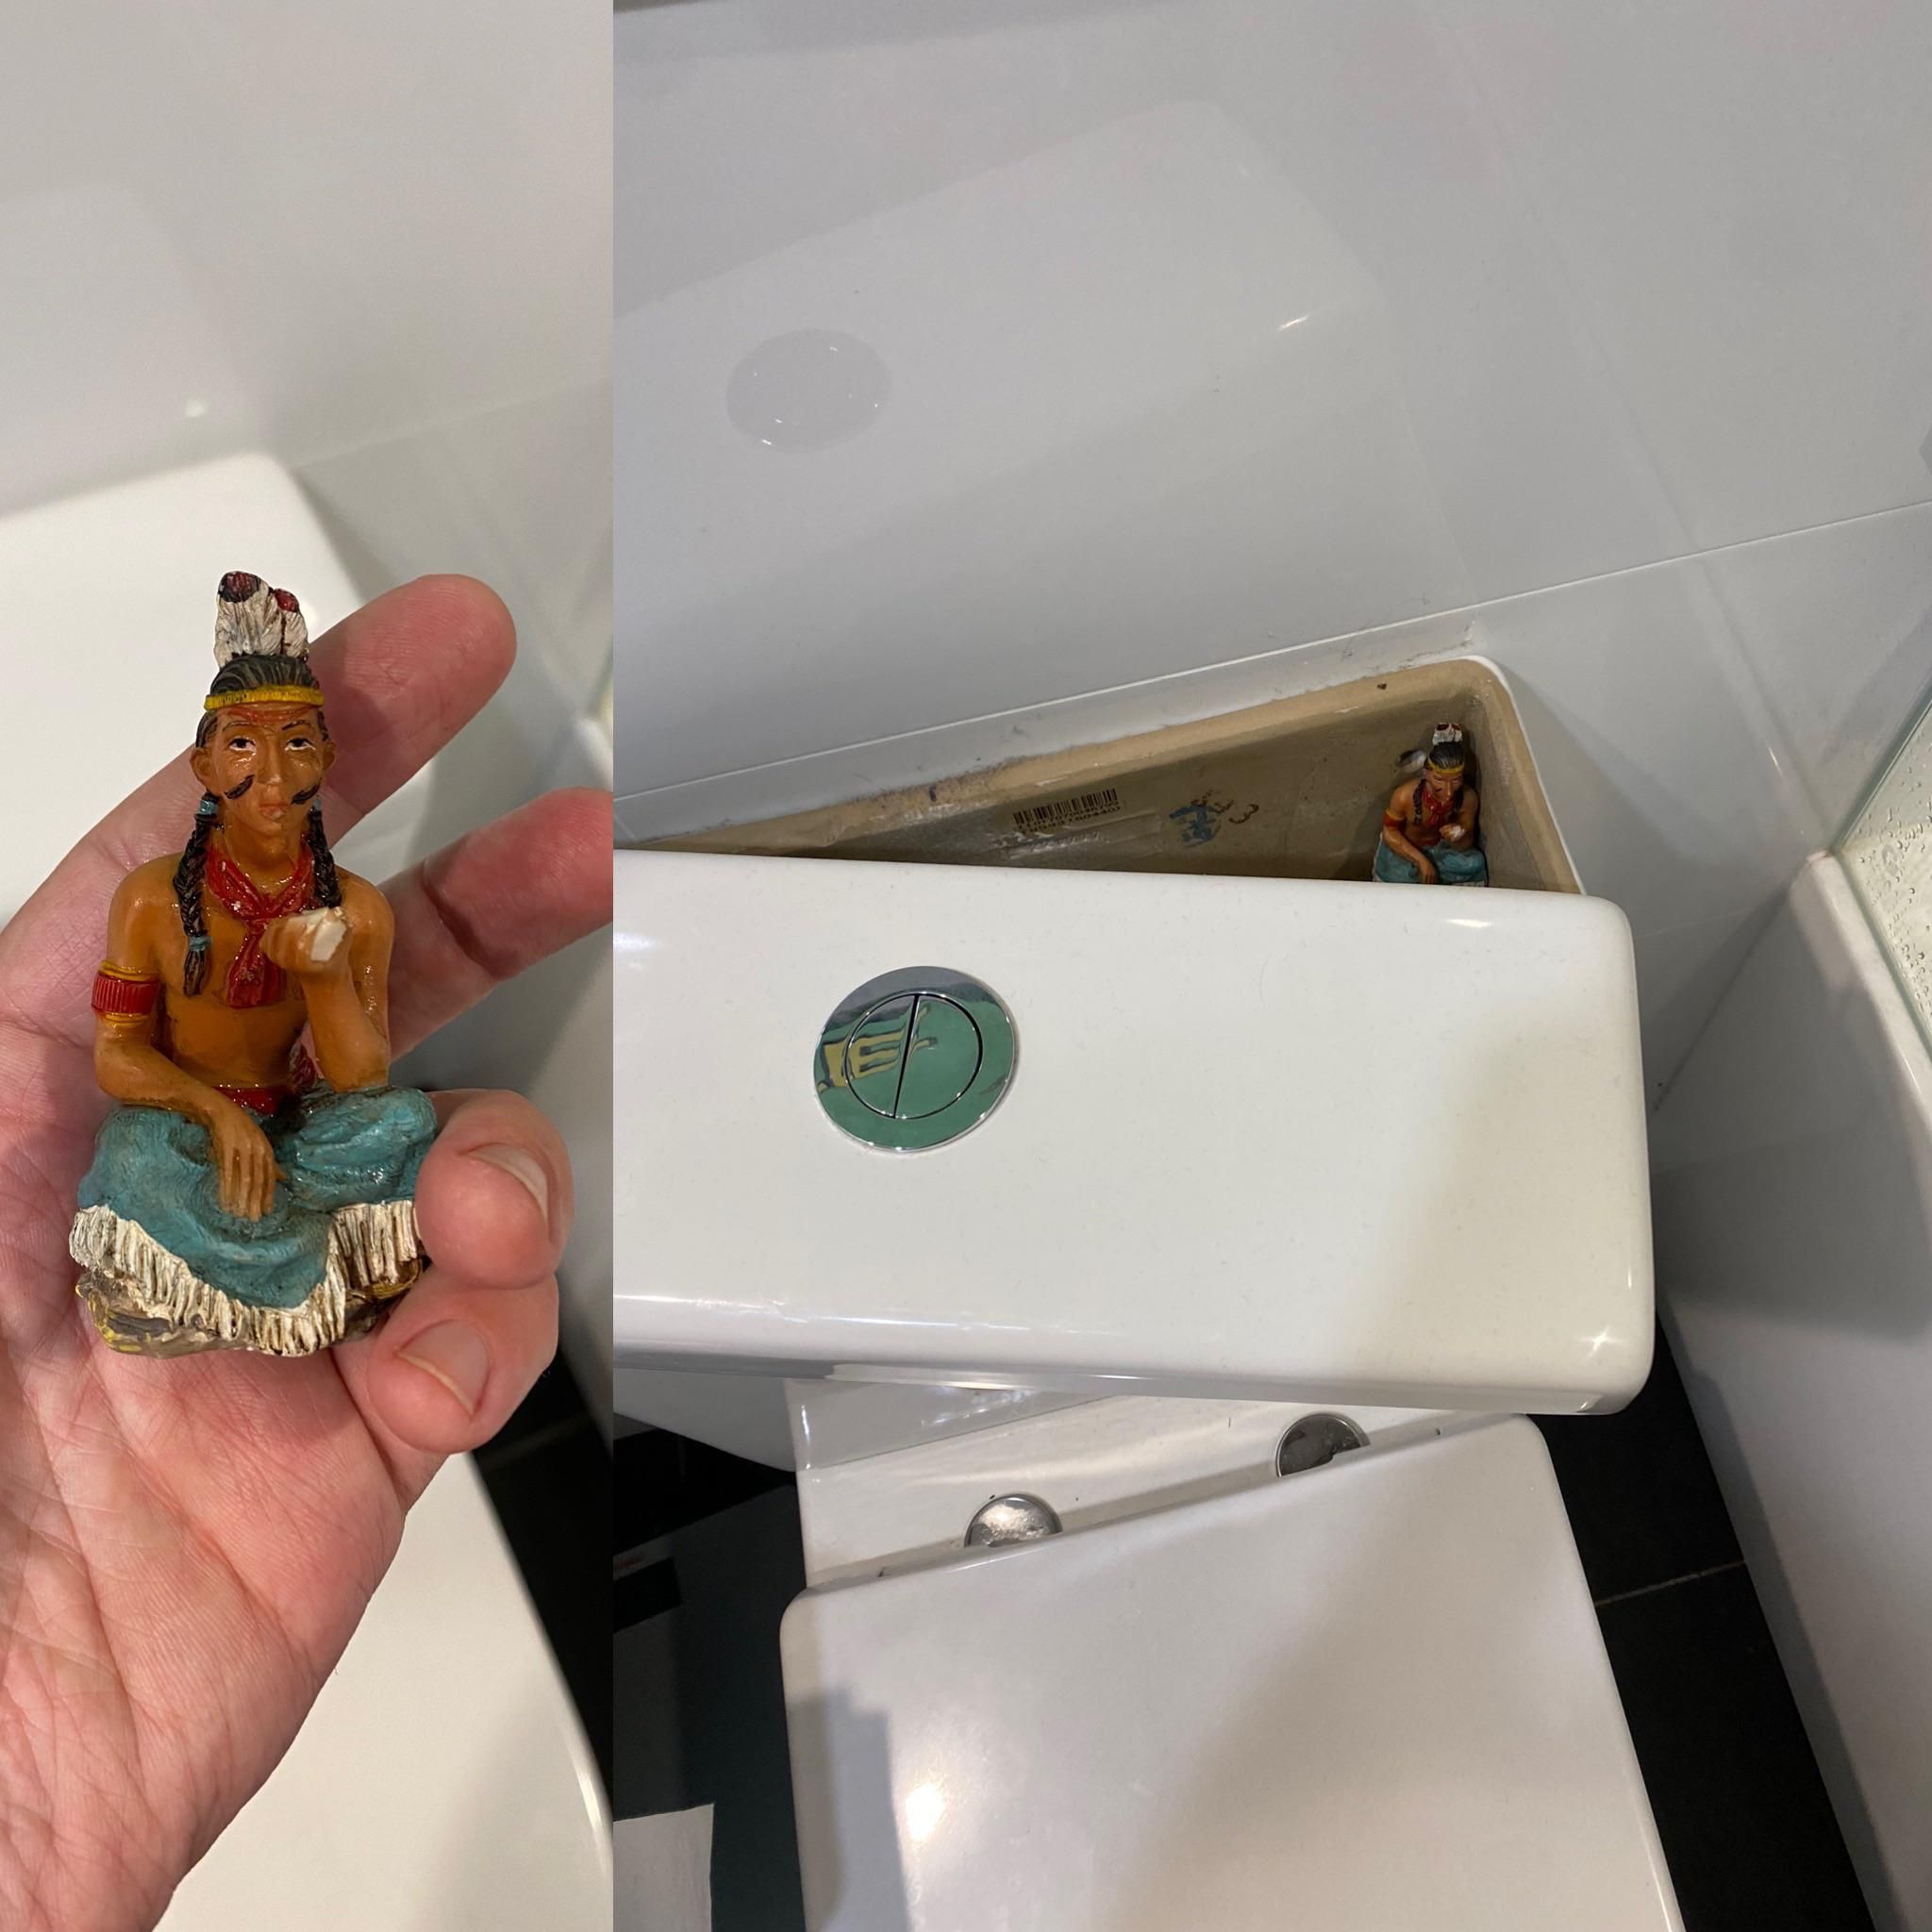 My mate and I have been hiding this Indian statue in each other’s houses for over 15 years. I don’t remember how the game started but this is his latest hiding spot